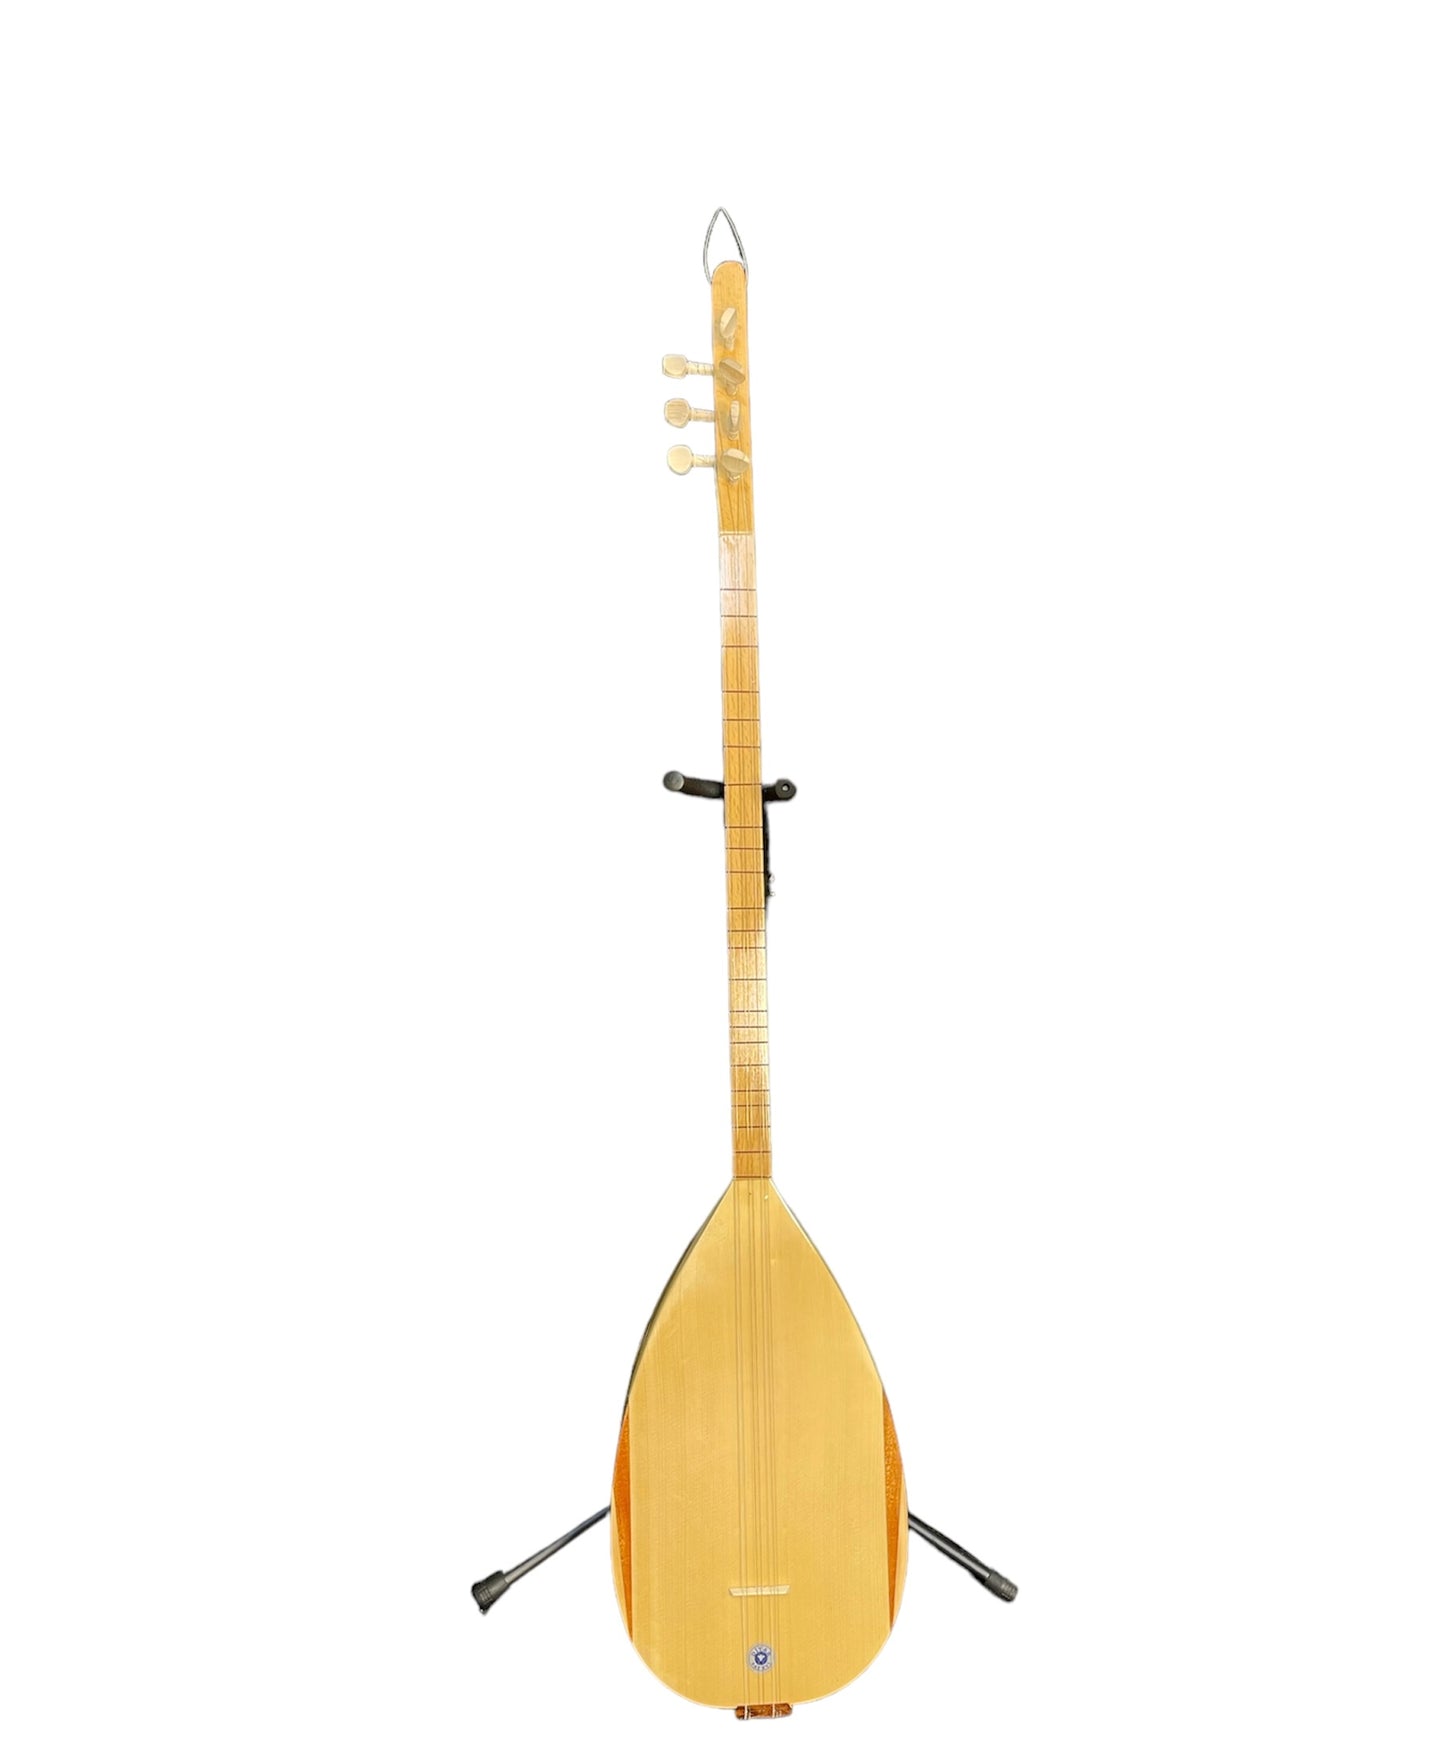 Diyarsaz with maple, mulberry and chestnut bodies - Salar Music